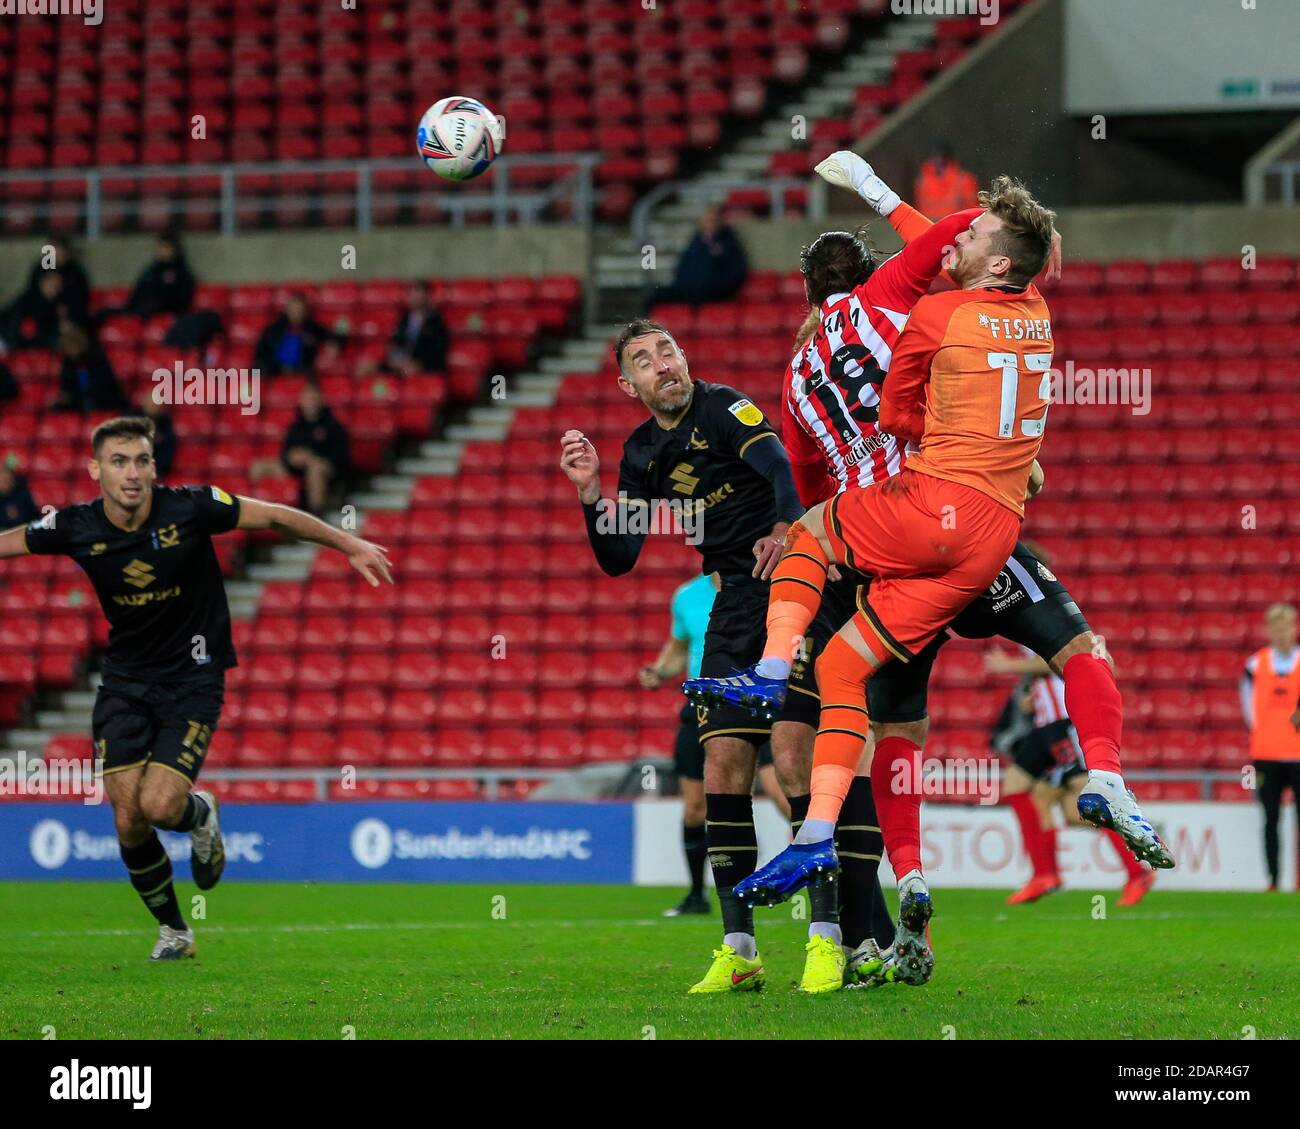 Andy Fisher #13 of Milton Keynes Dons punches the ball under pressure from Danny Graham #18 of Sunderland Stock Photo